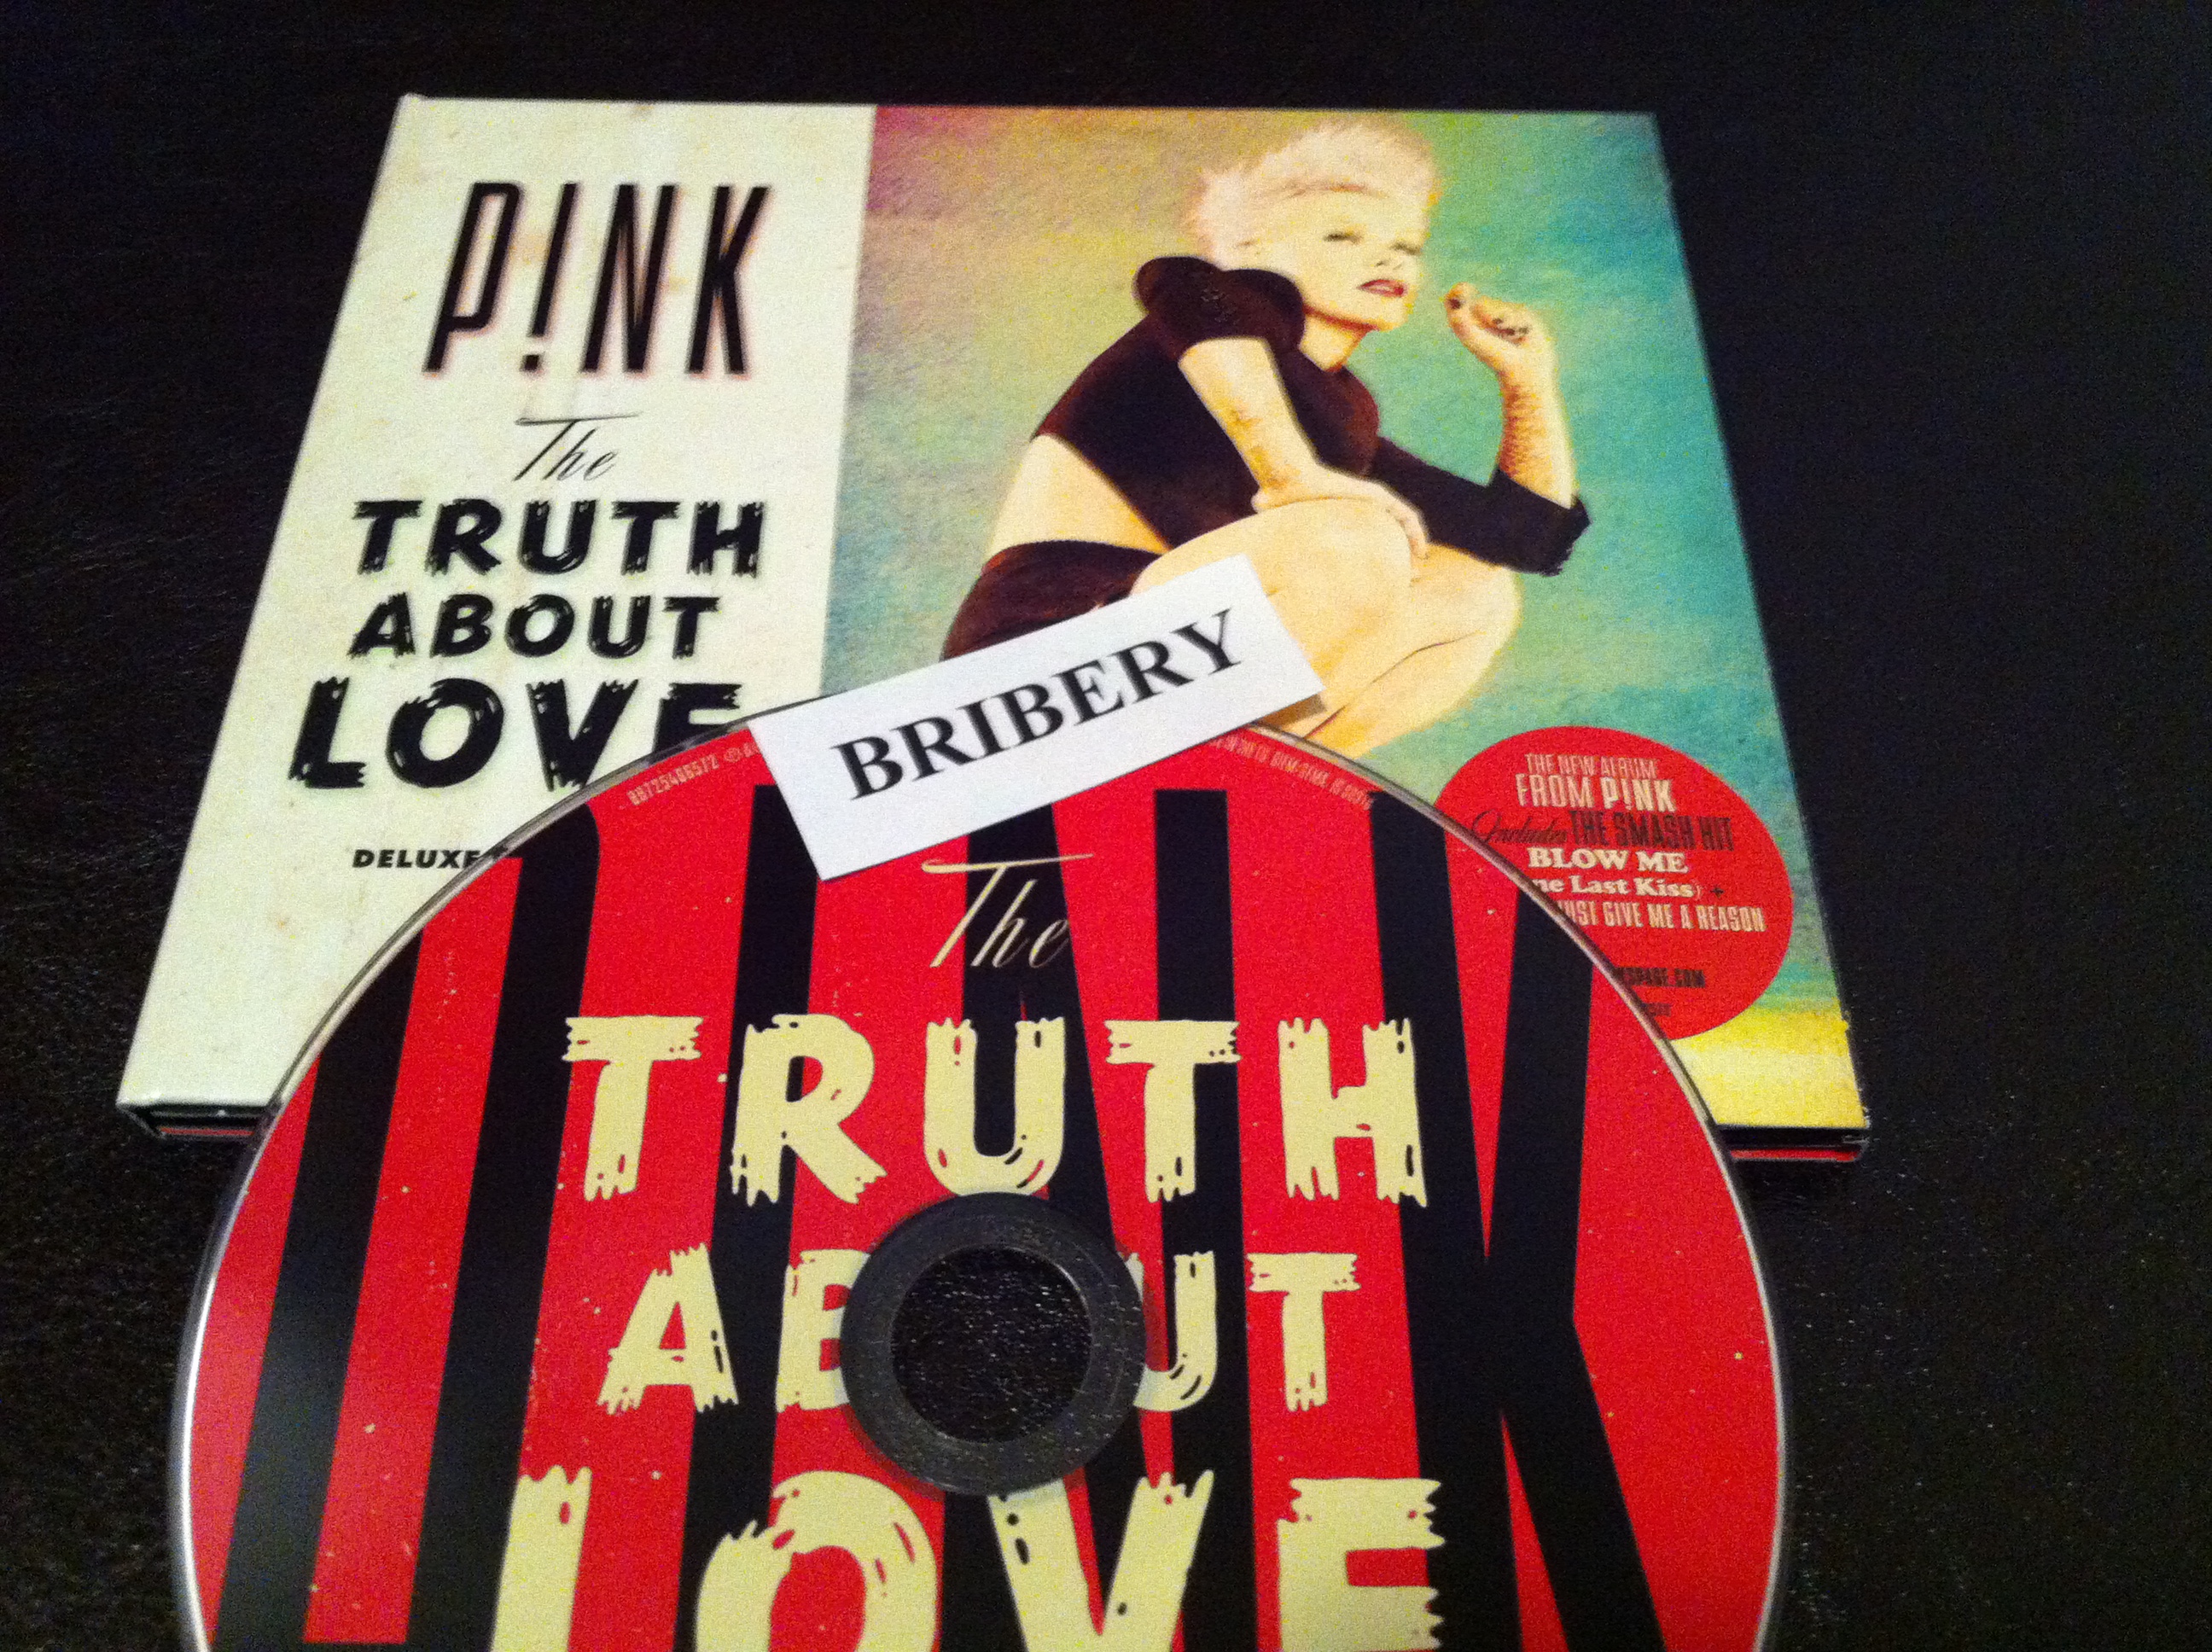 Pink-The_Truth_About_Love-Deluxe-CD-FLAC-2012-BriBerY - 00-pink-the_truth_about_love-deluxe-cd-flac-2012-proof.jpg